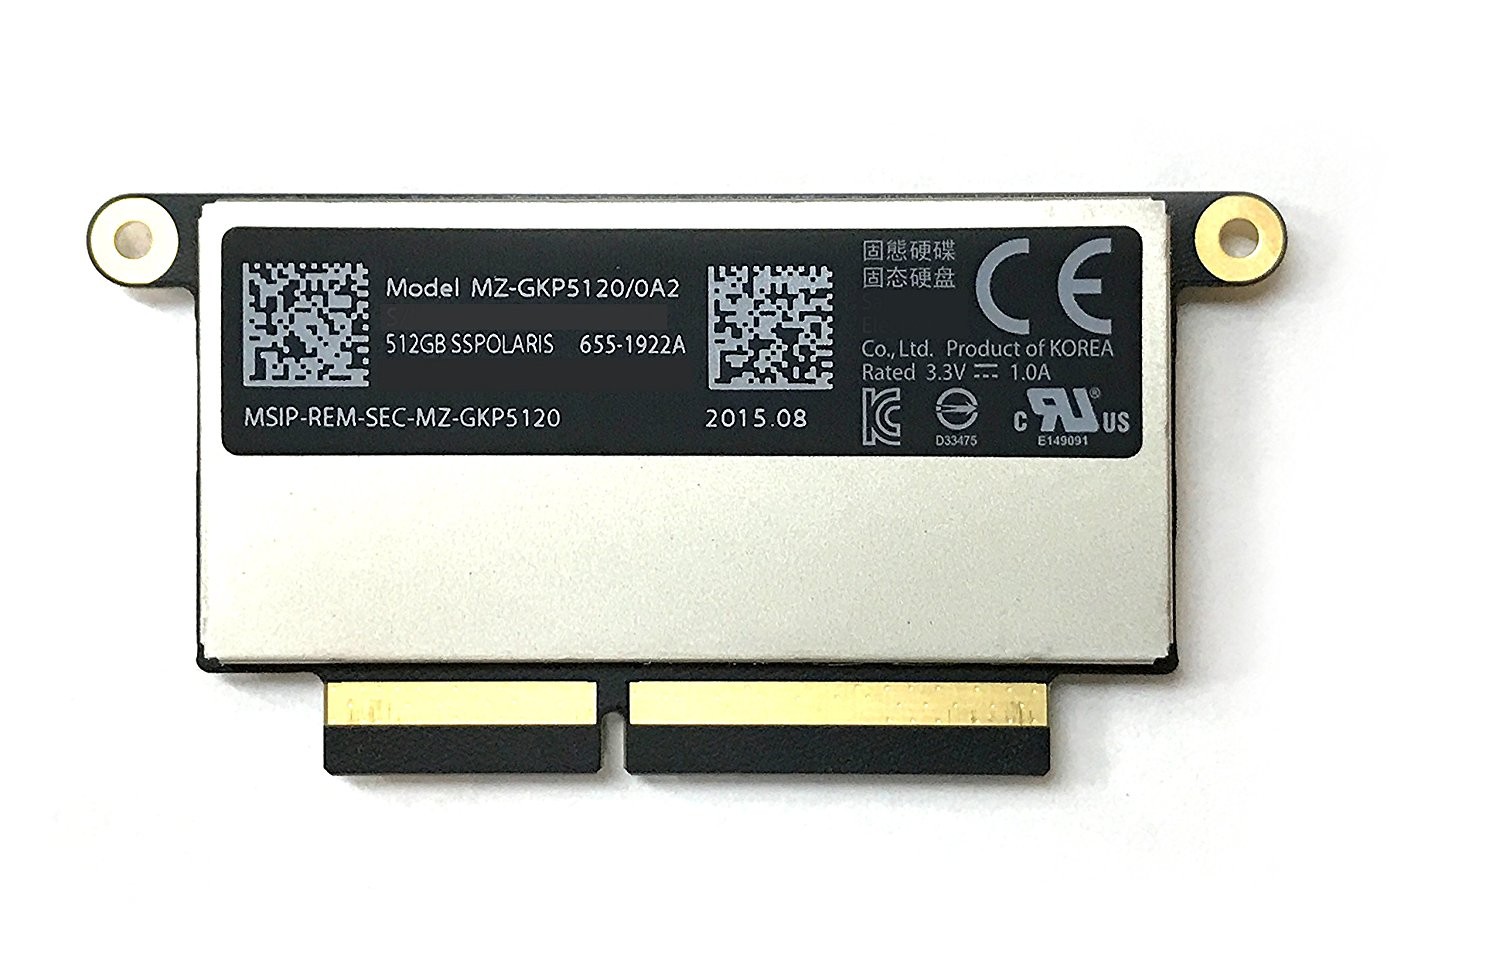 Pcie ssd for macbook pro 2015